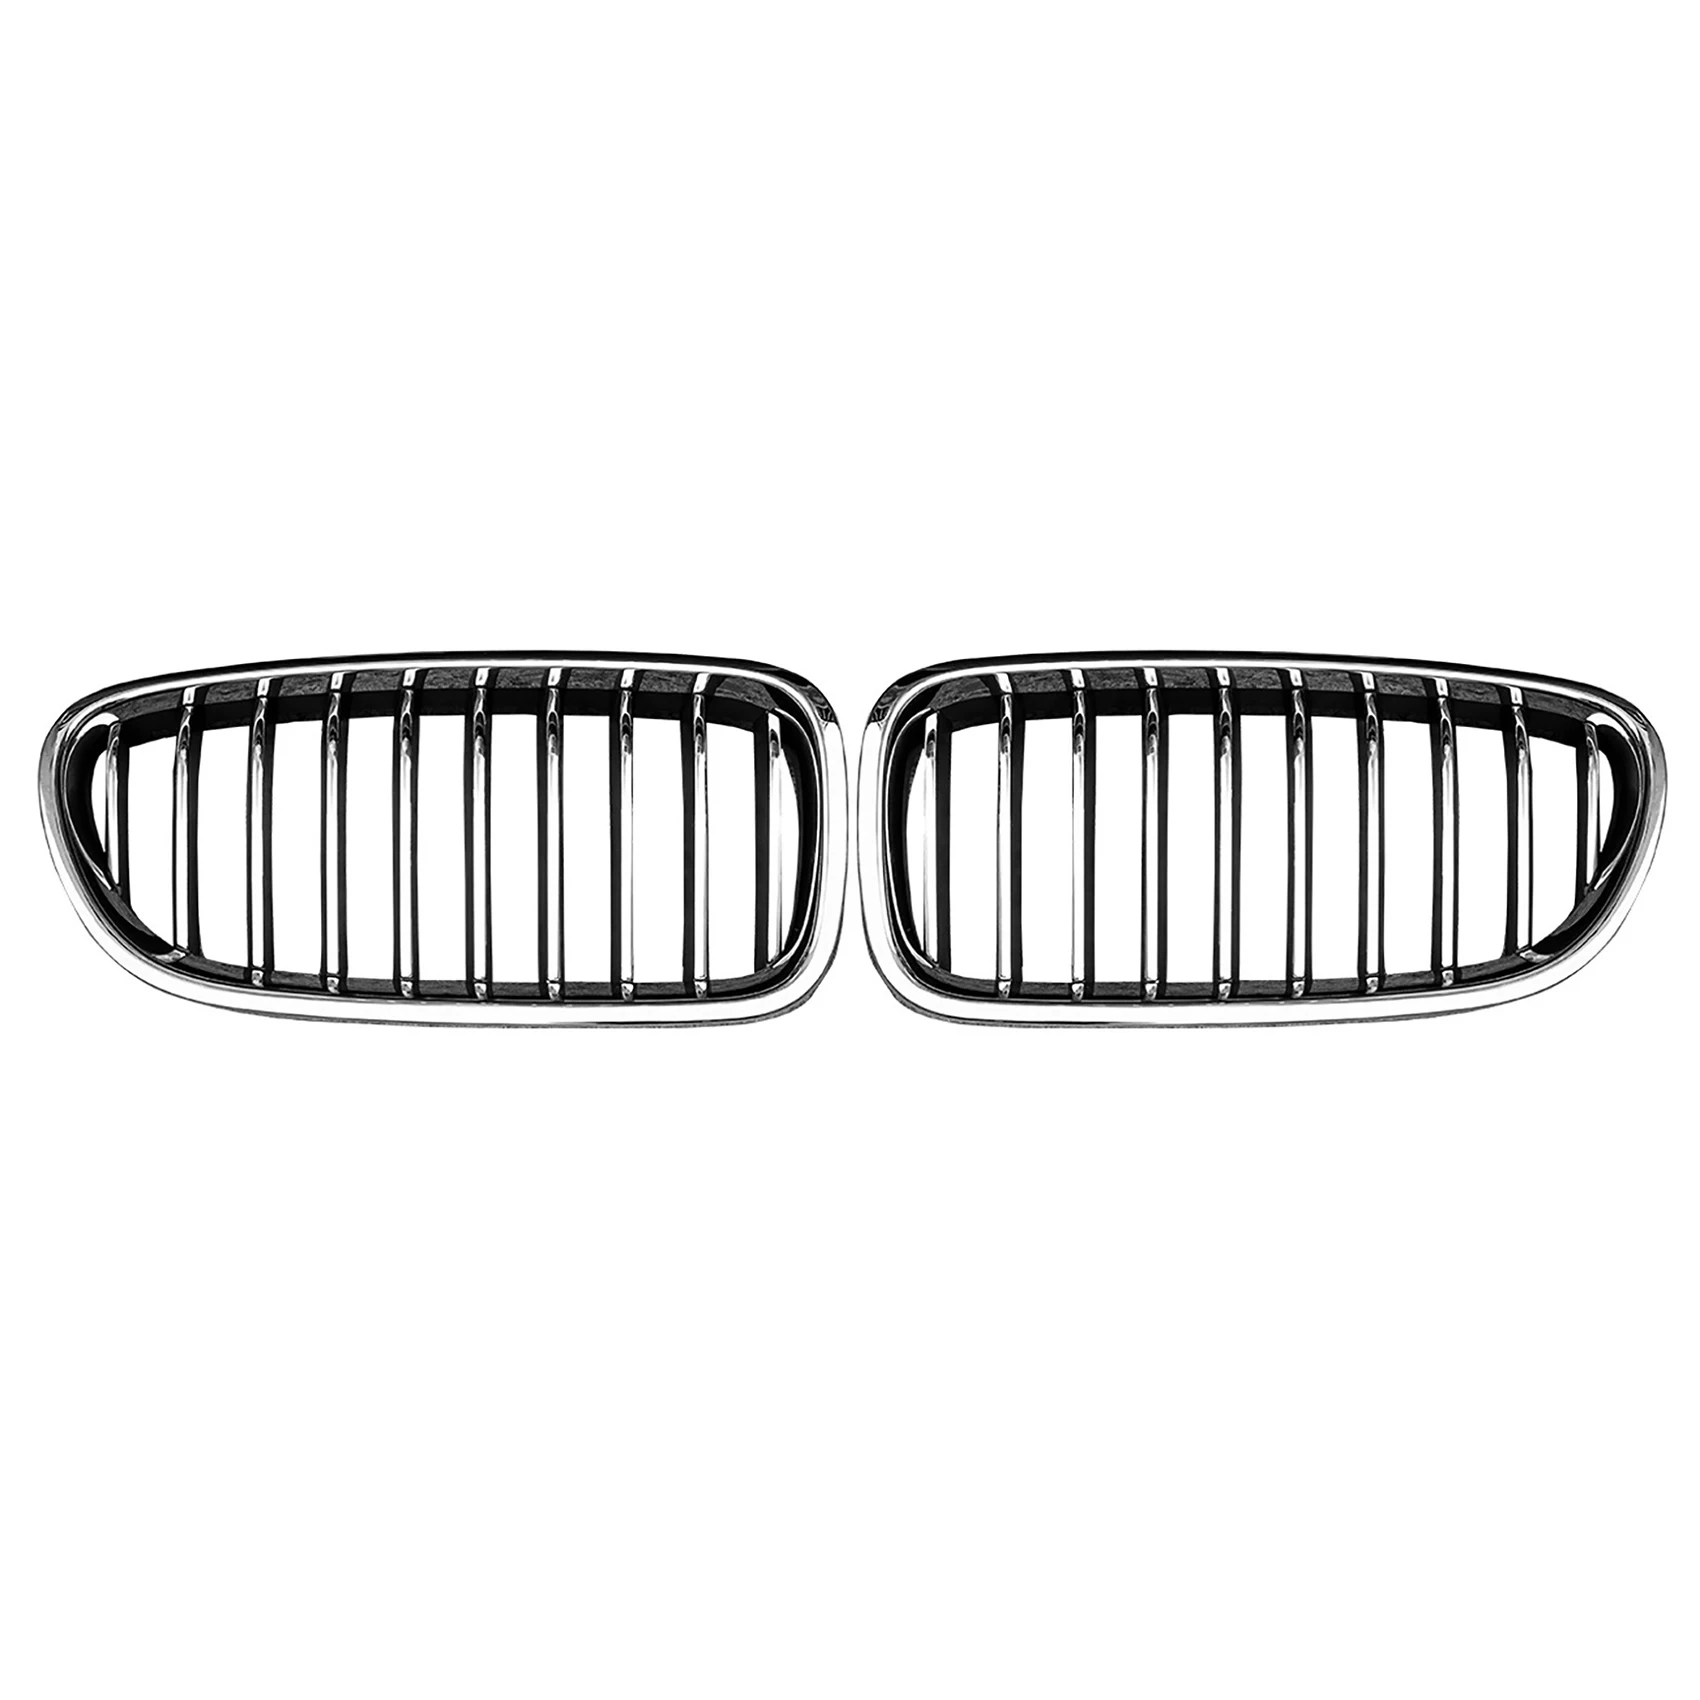 

2Pcs Car Front Hood Kidney Grille Grill Mesh Chrome Racing Grills for BMW 5 Series F10/F11 M5 520I 523I 2014-2017